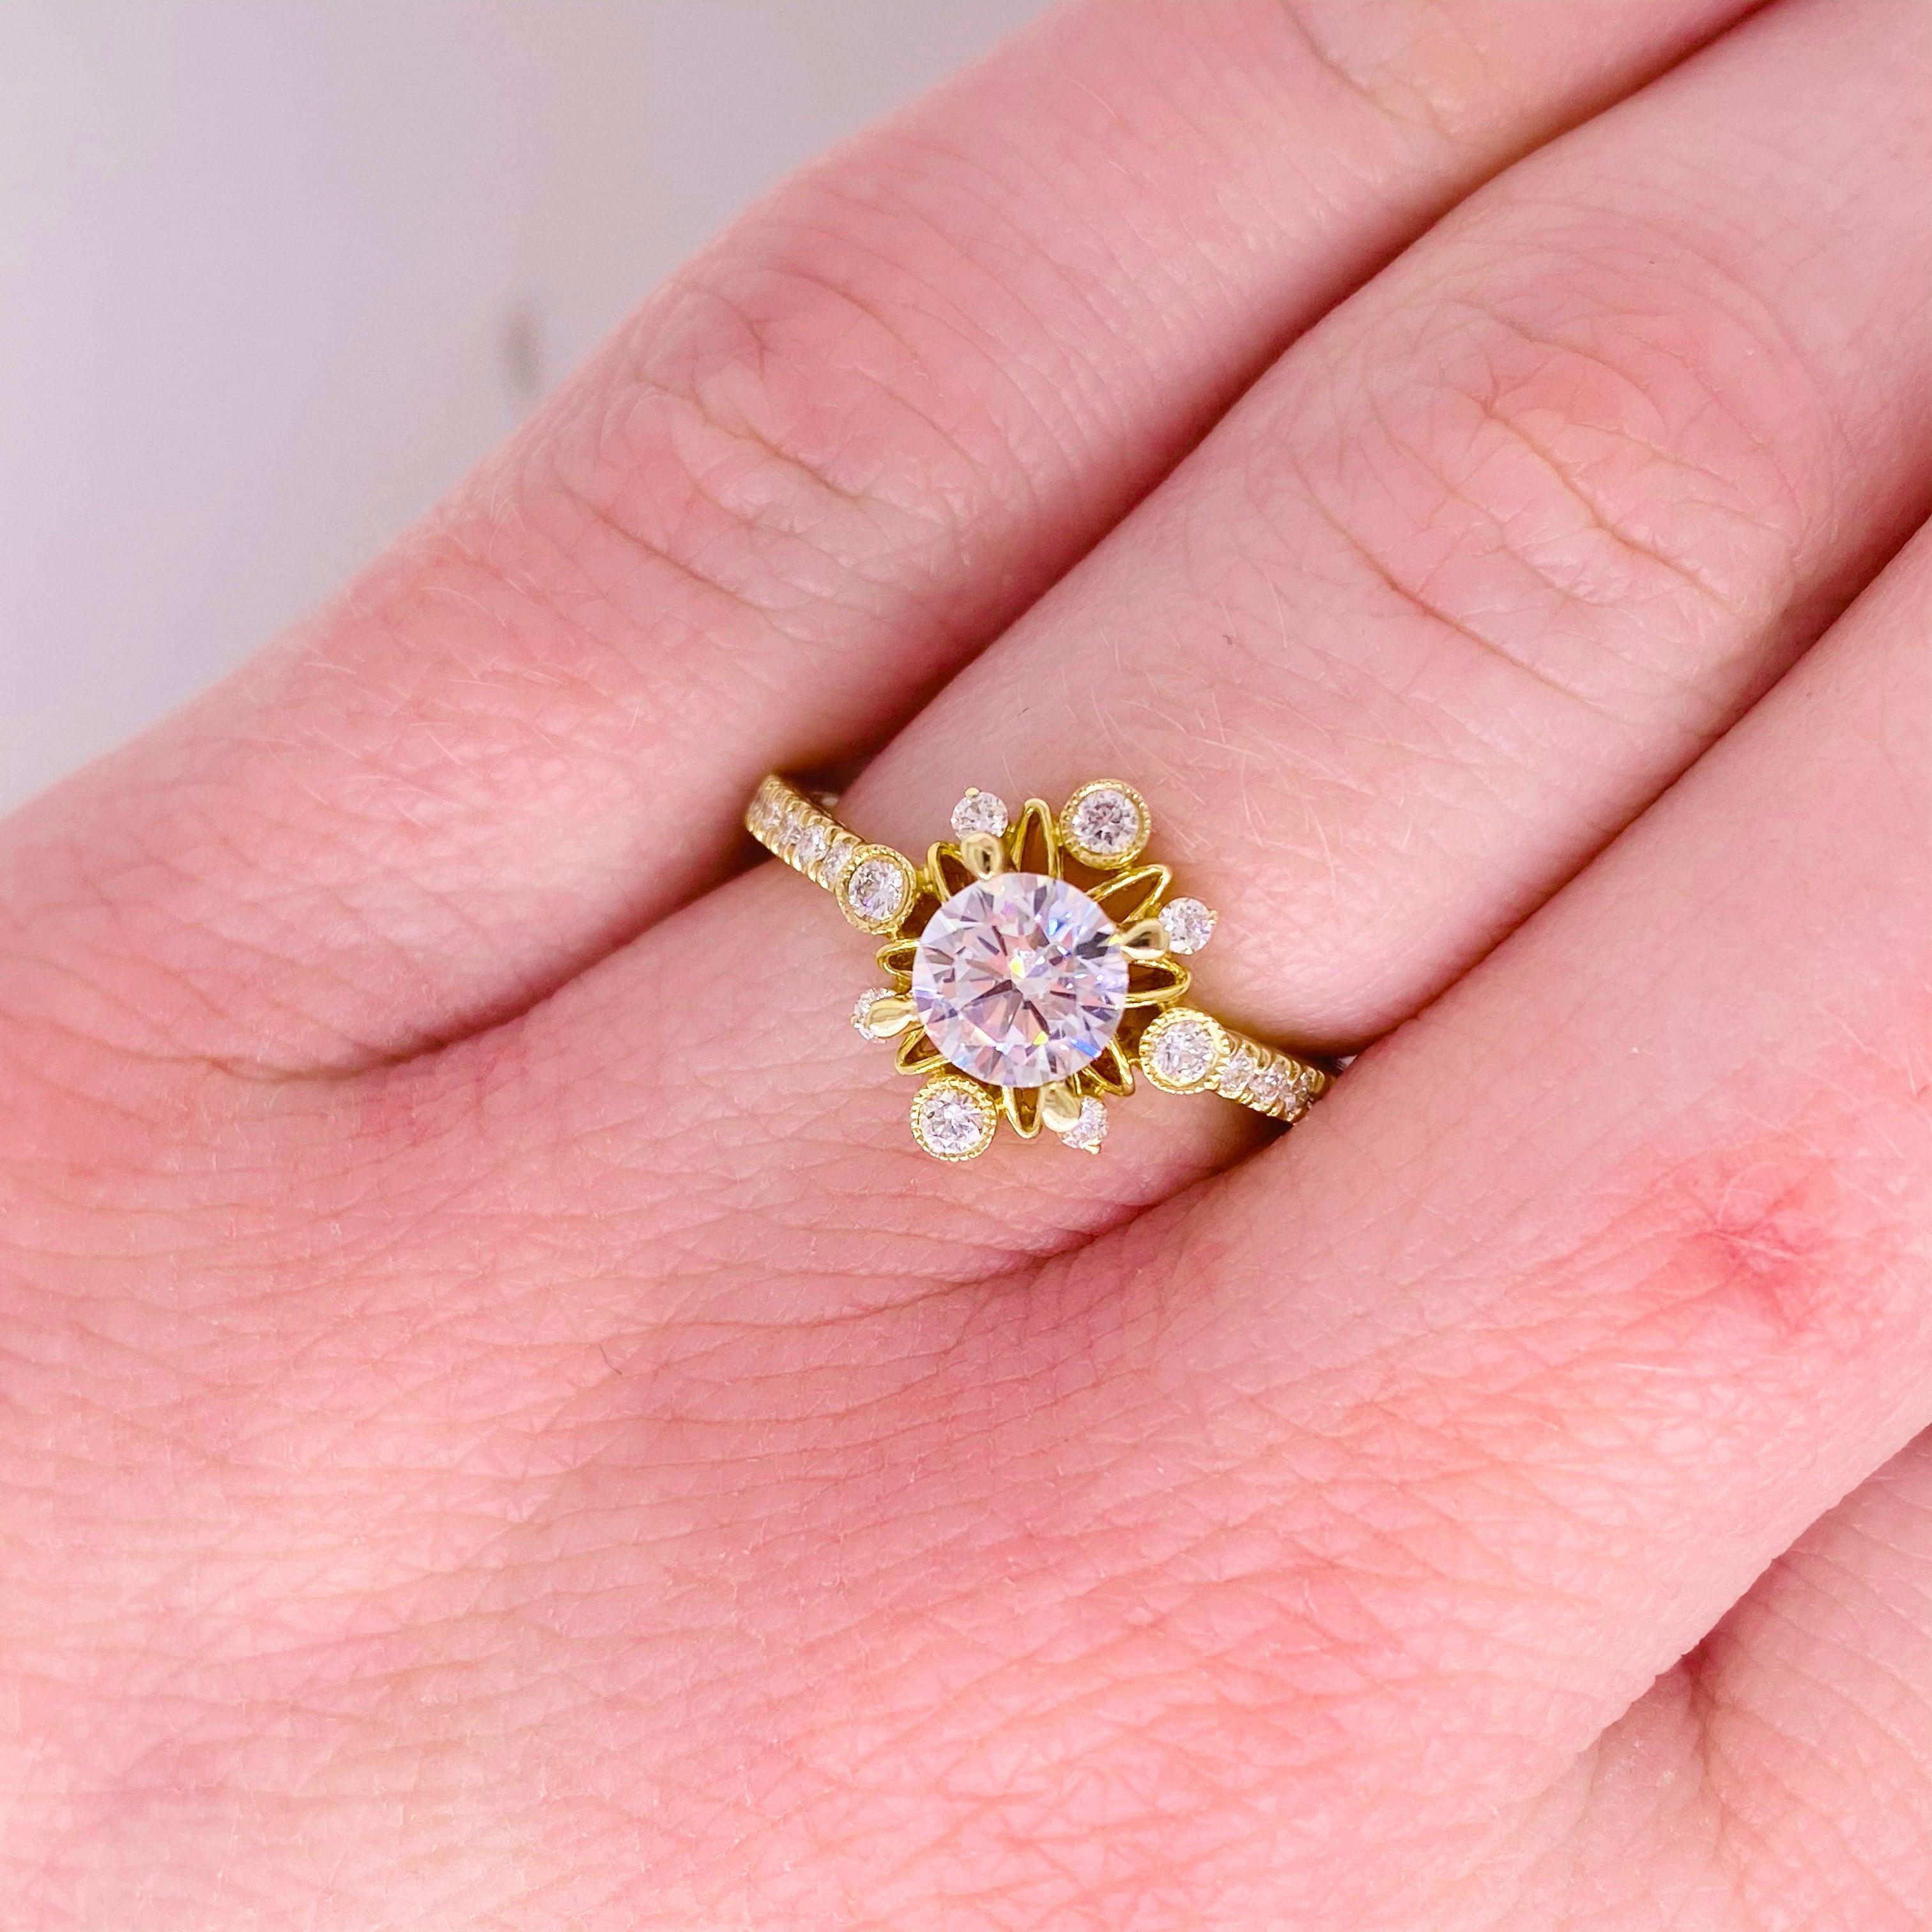 For Sale:  One Carat Diamond Engagement Ring, Fancy Halo, Yellow Gold, Round Brilliant 2